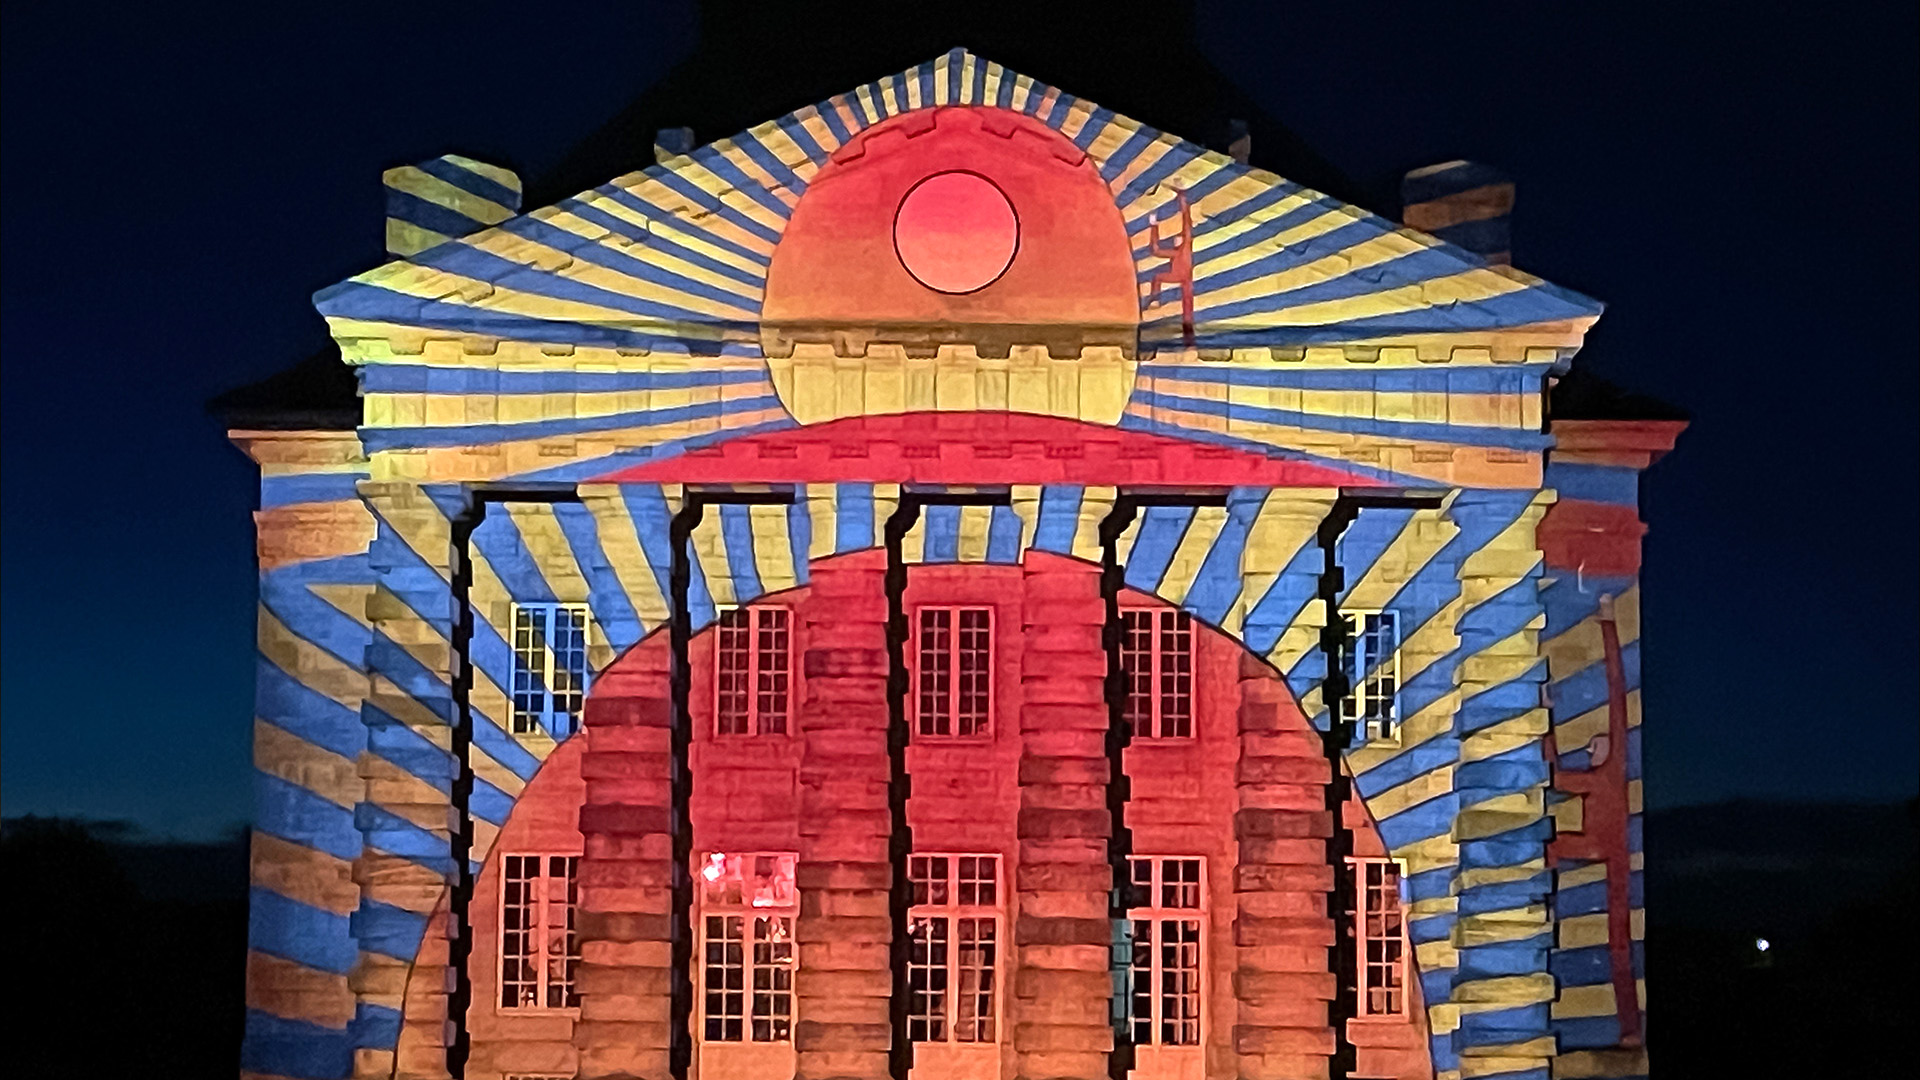 Angers, château d'Angers, mapping, azarek,2019